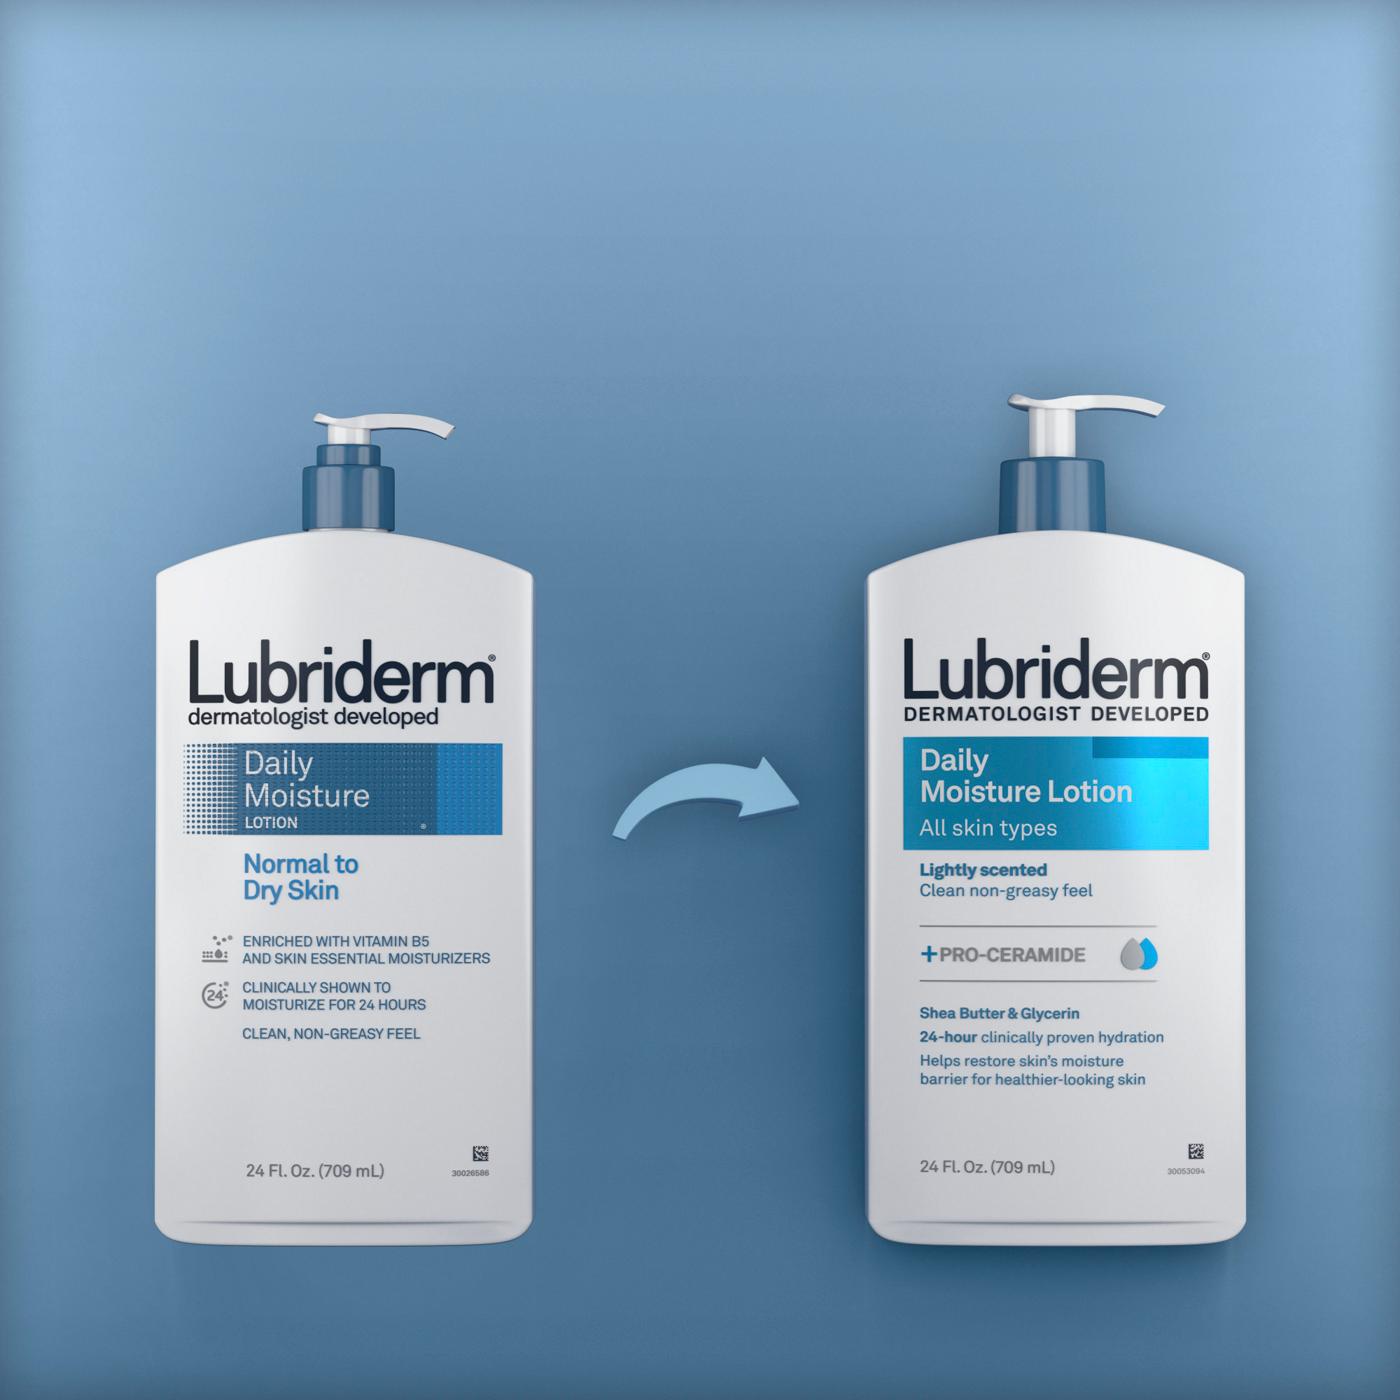 Lubriderm Daily Moisture Lotion; image 6 of 8